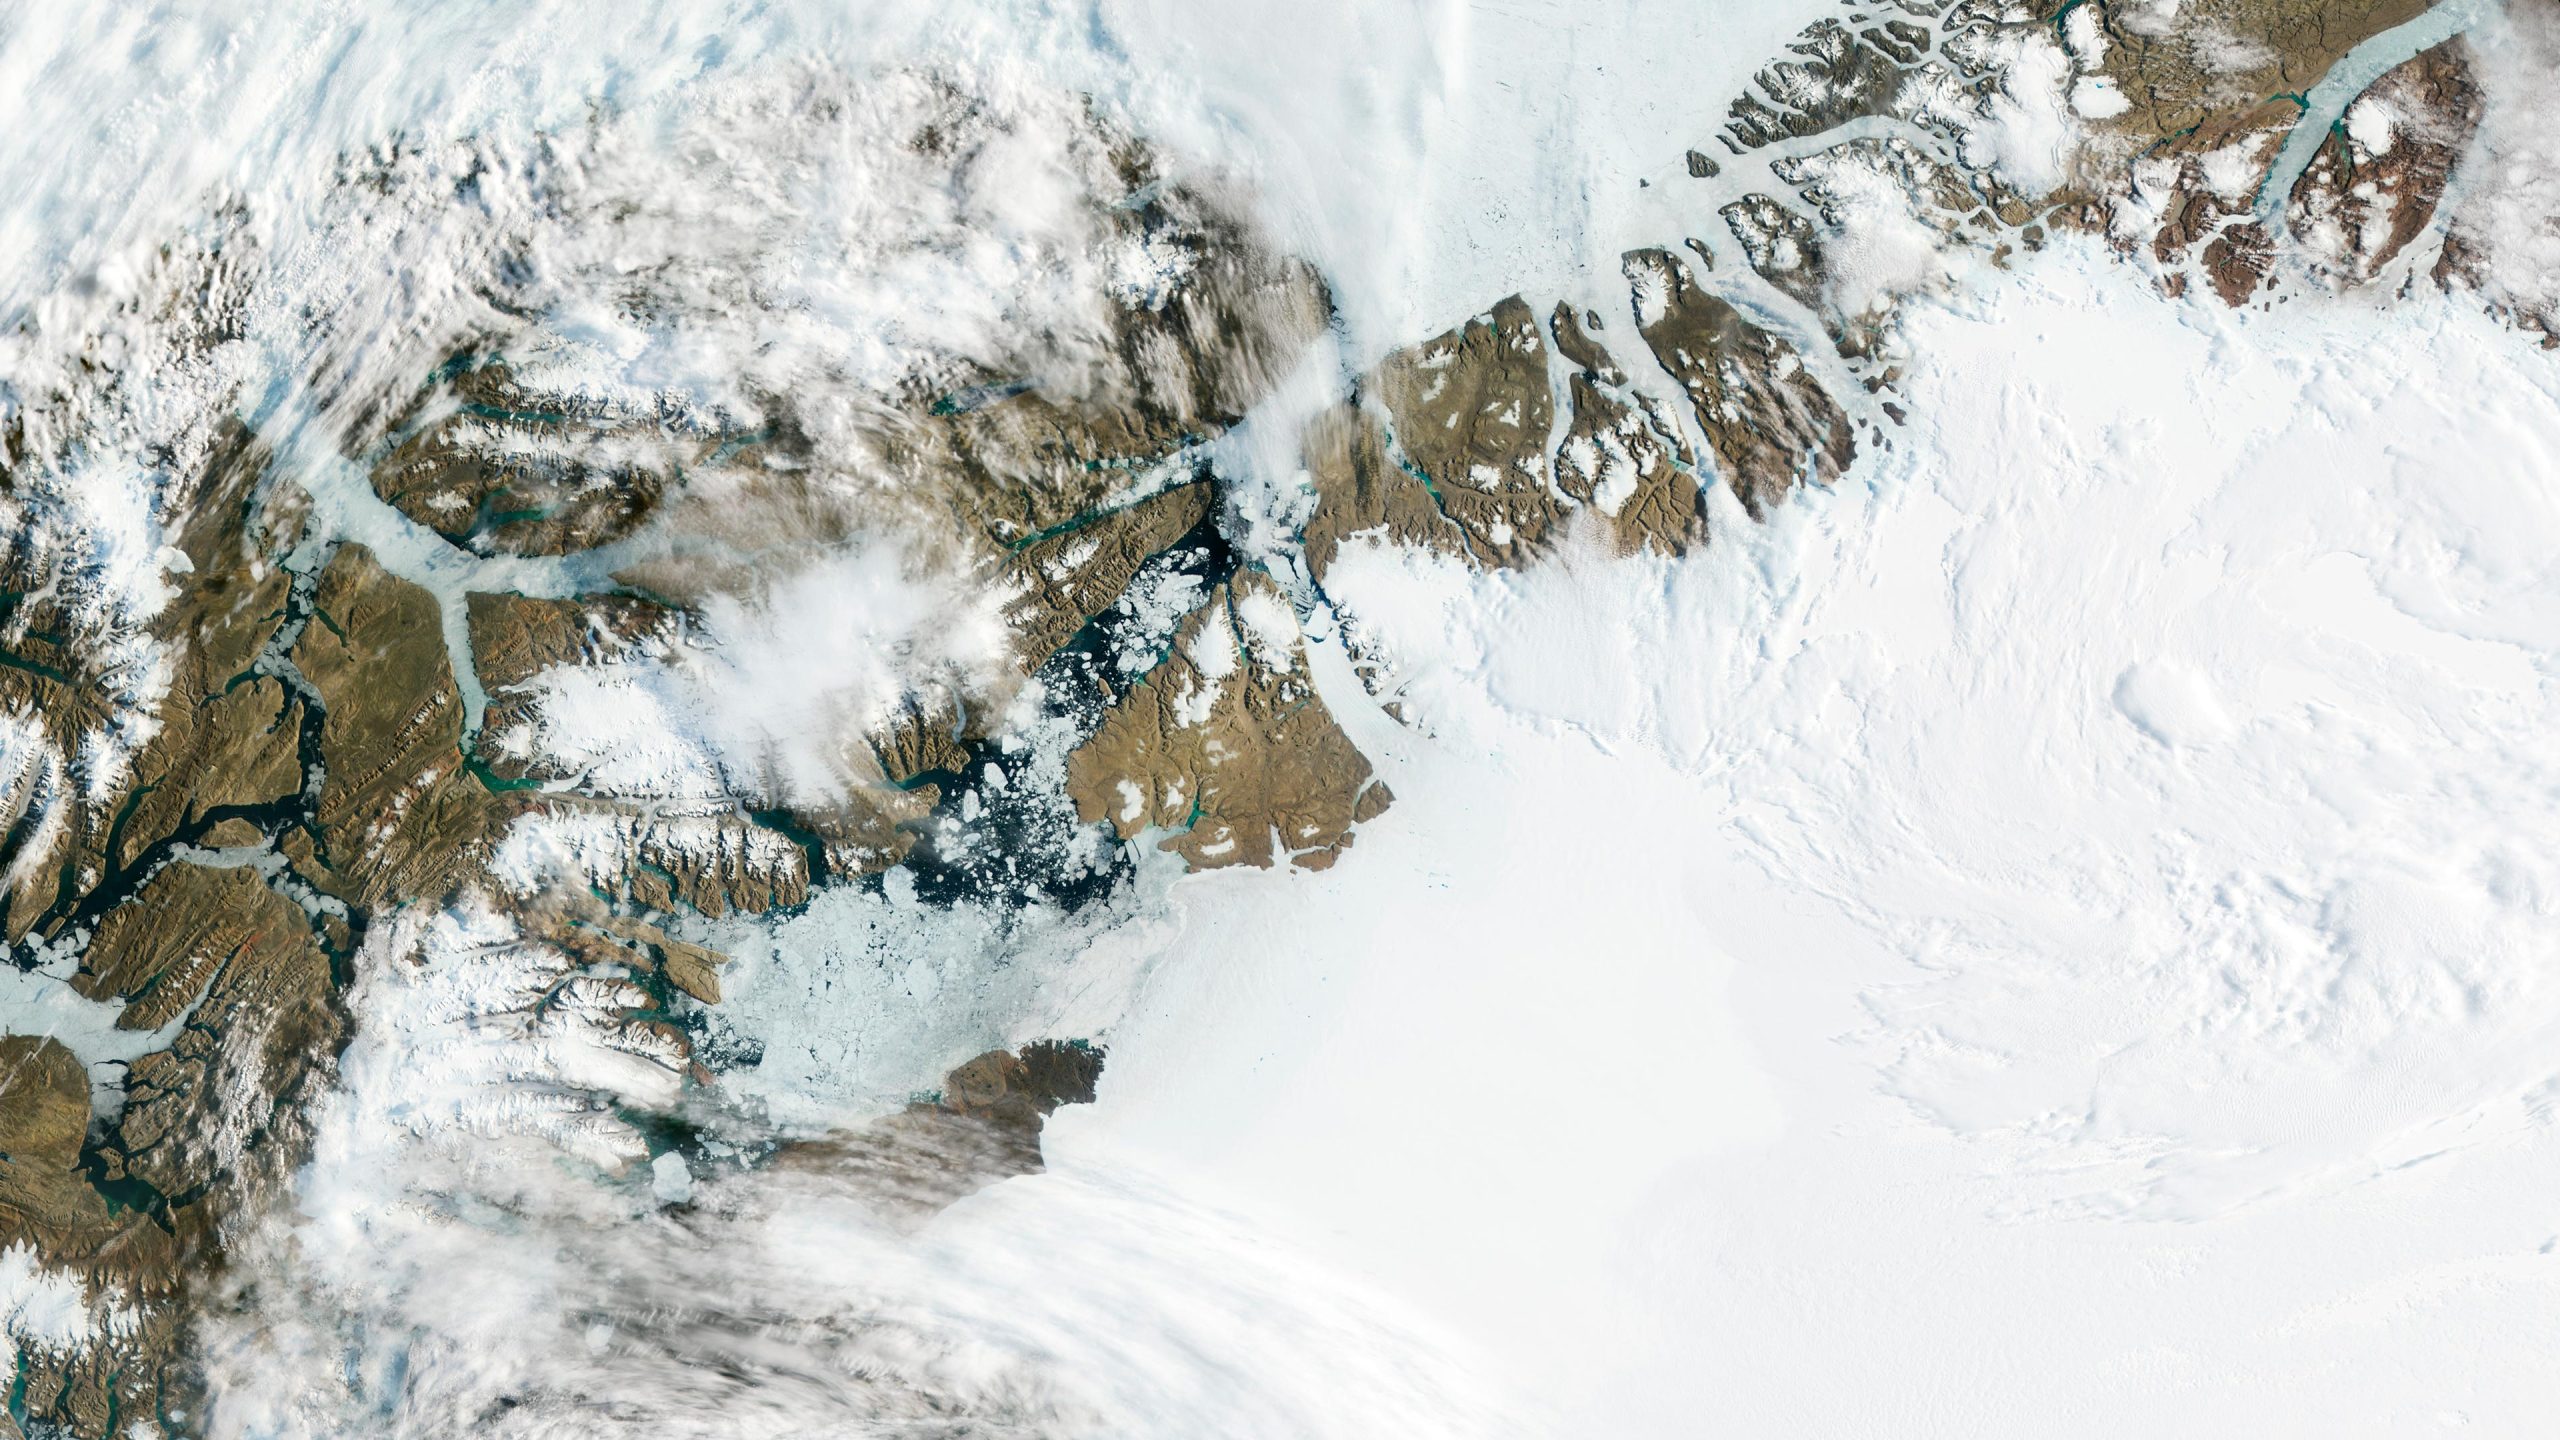 Researchers reveal the secret behind the Greenland avalanche